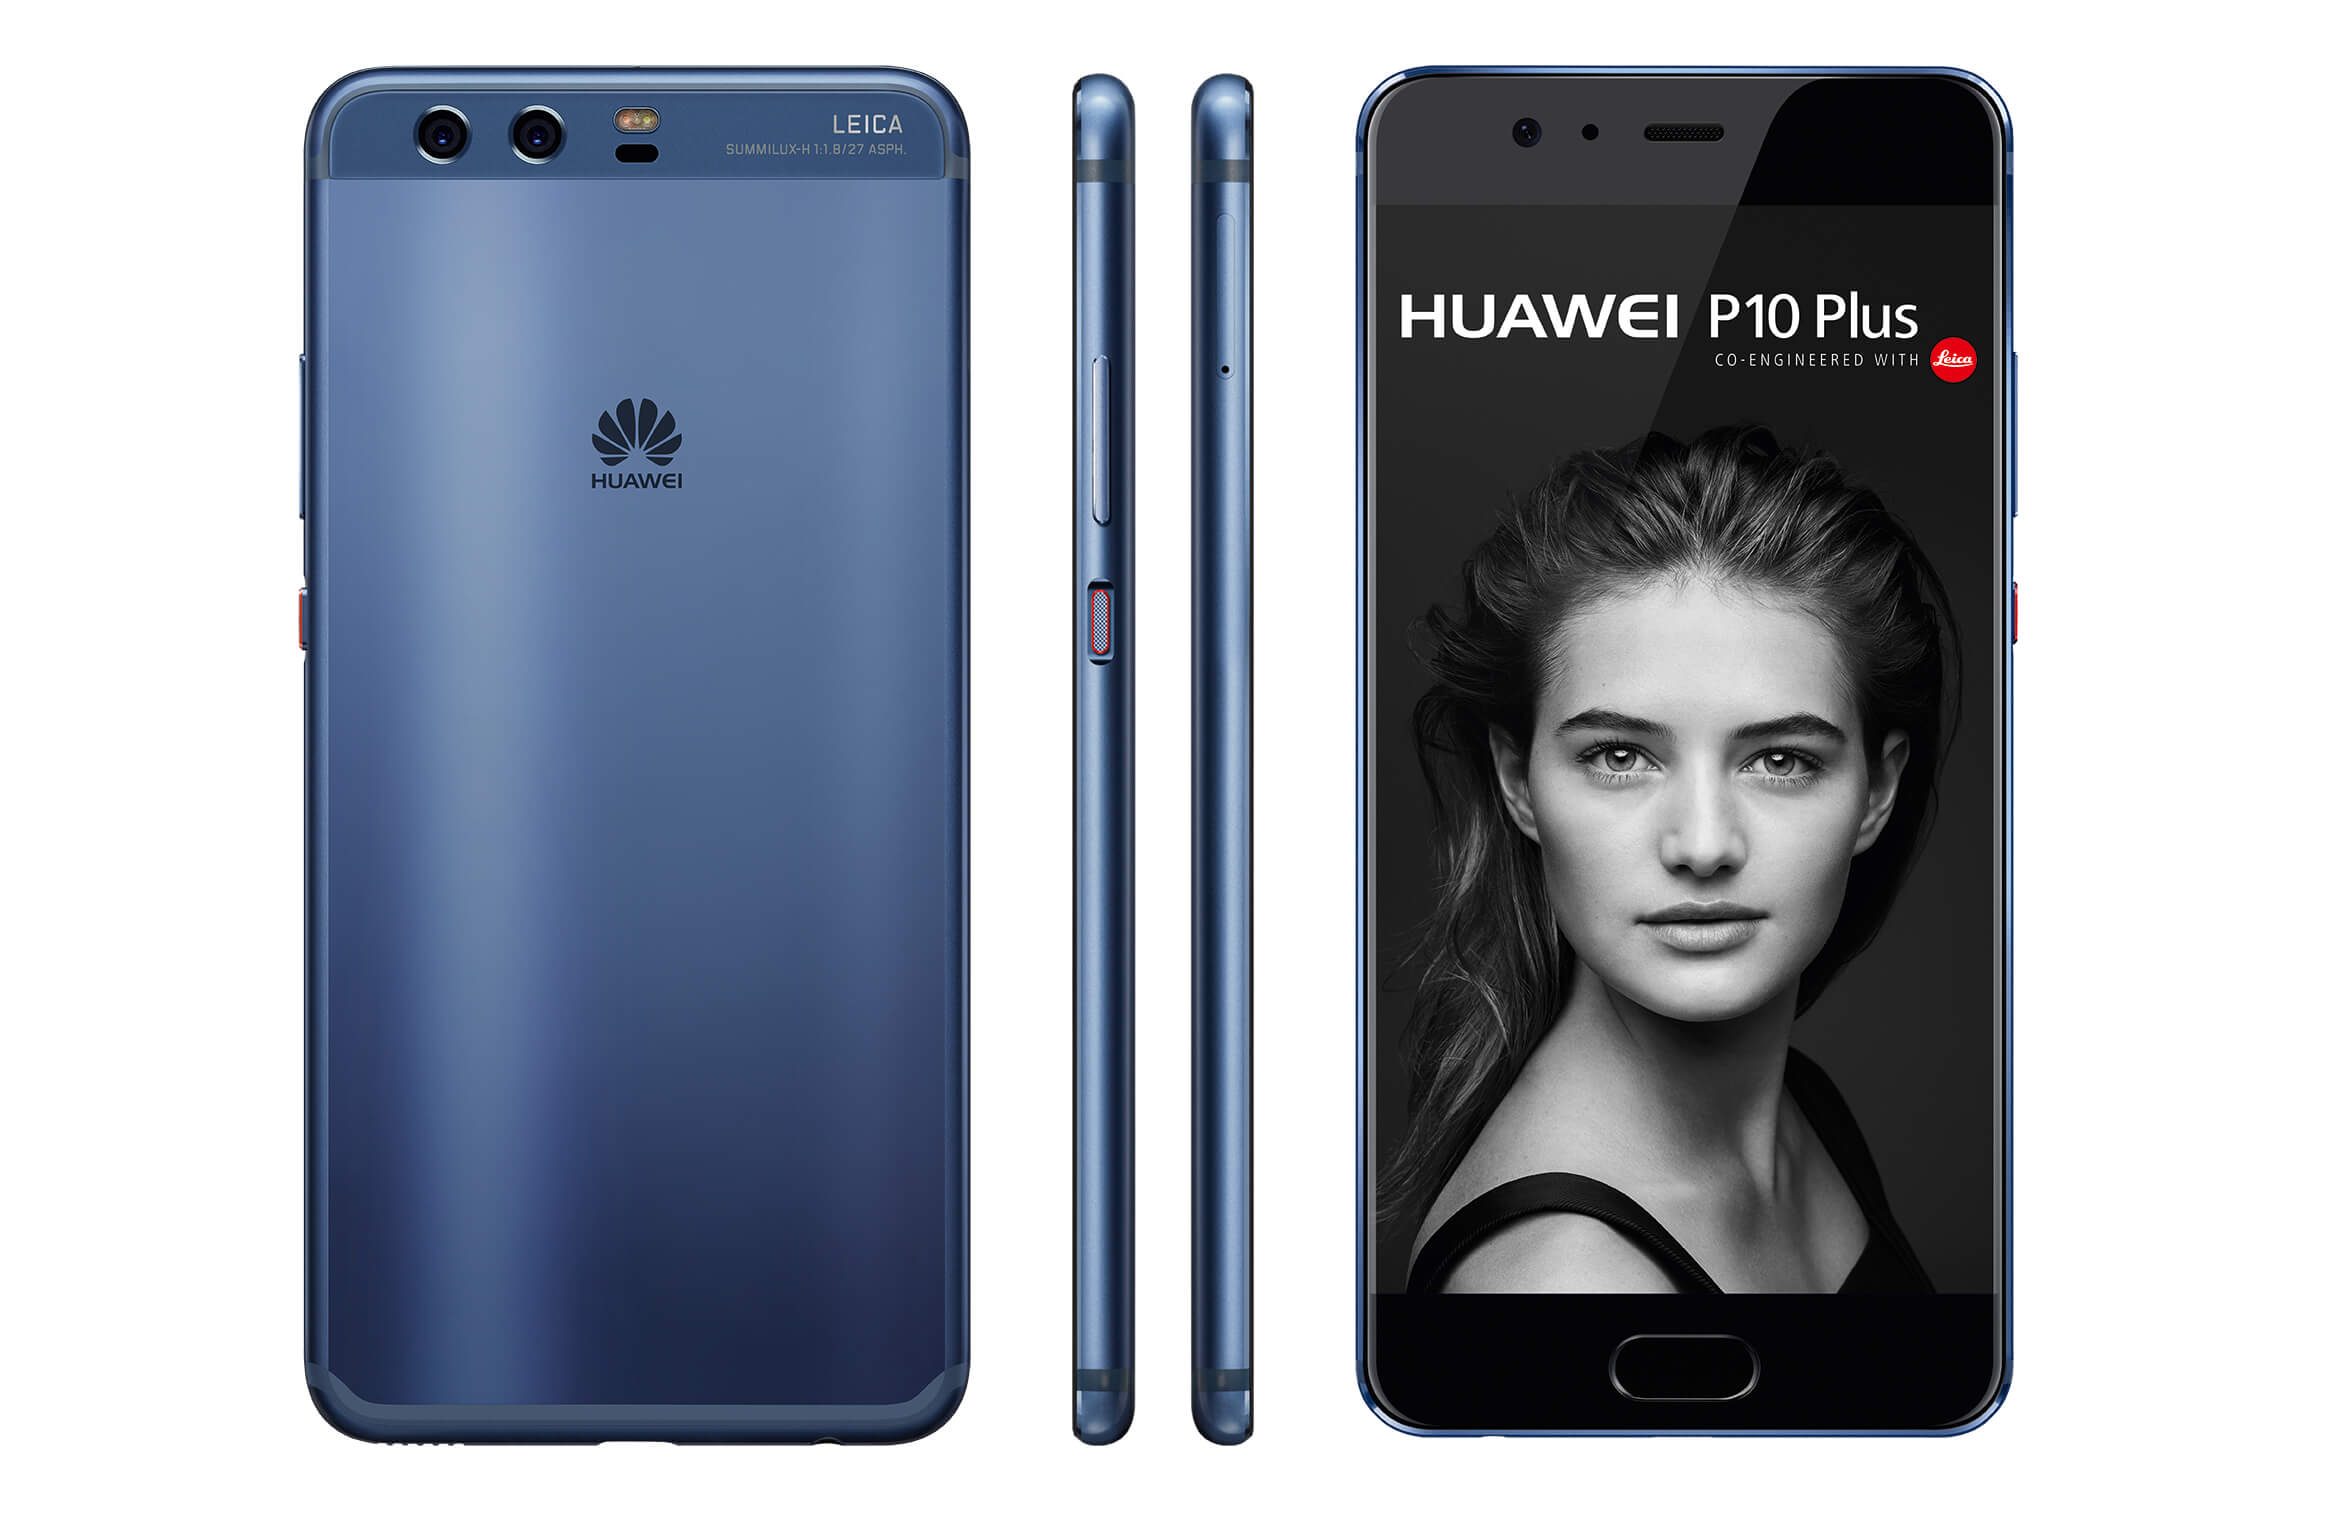 Huawei P10 Plus Android Smartphone